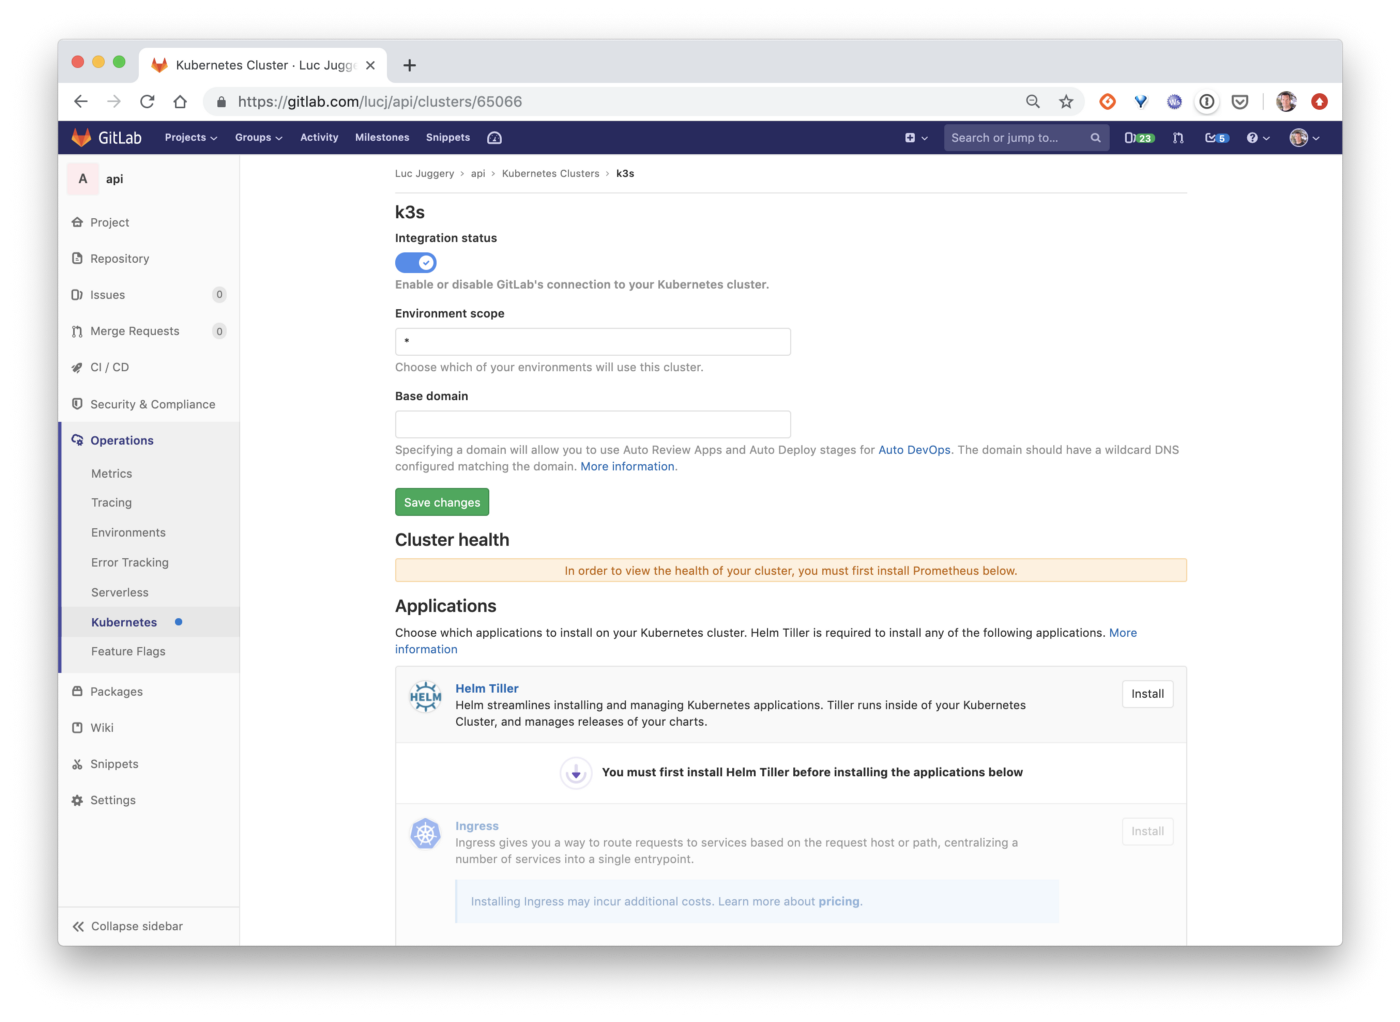 content/wechat/articles/2020/05/2020-05-06-using-a-k3s-kubernetes-cluster-for-your-gitlab-project/install-helm.png